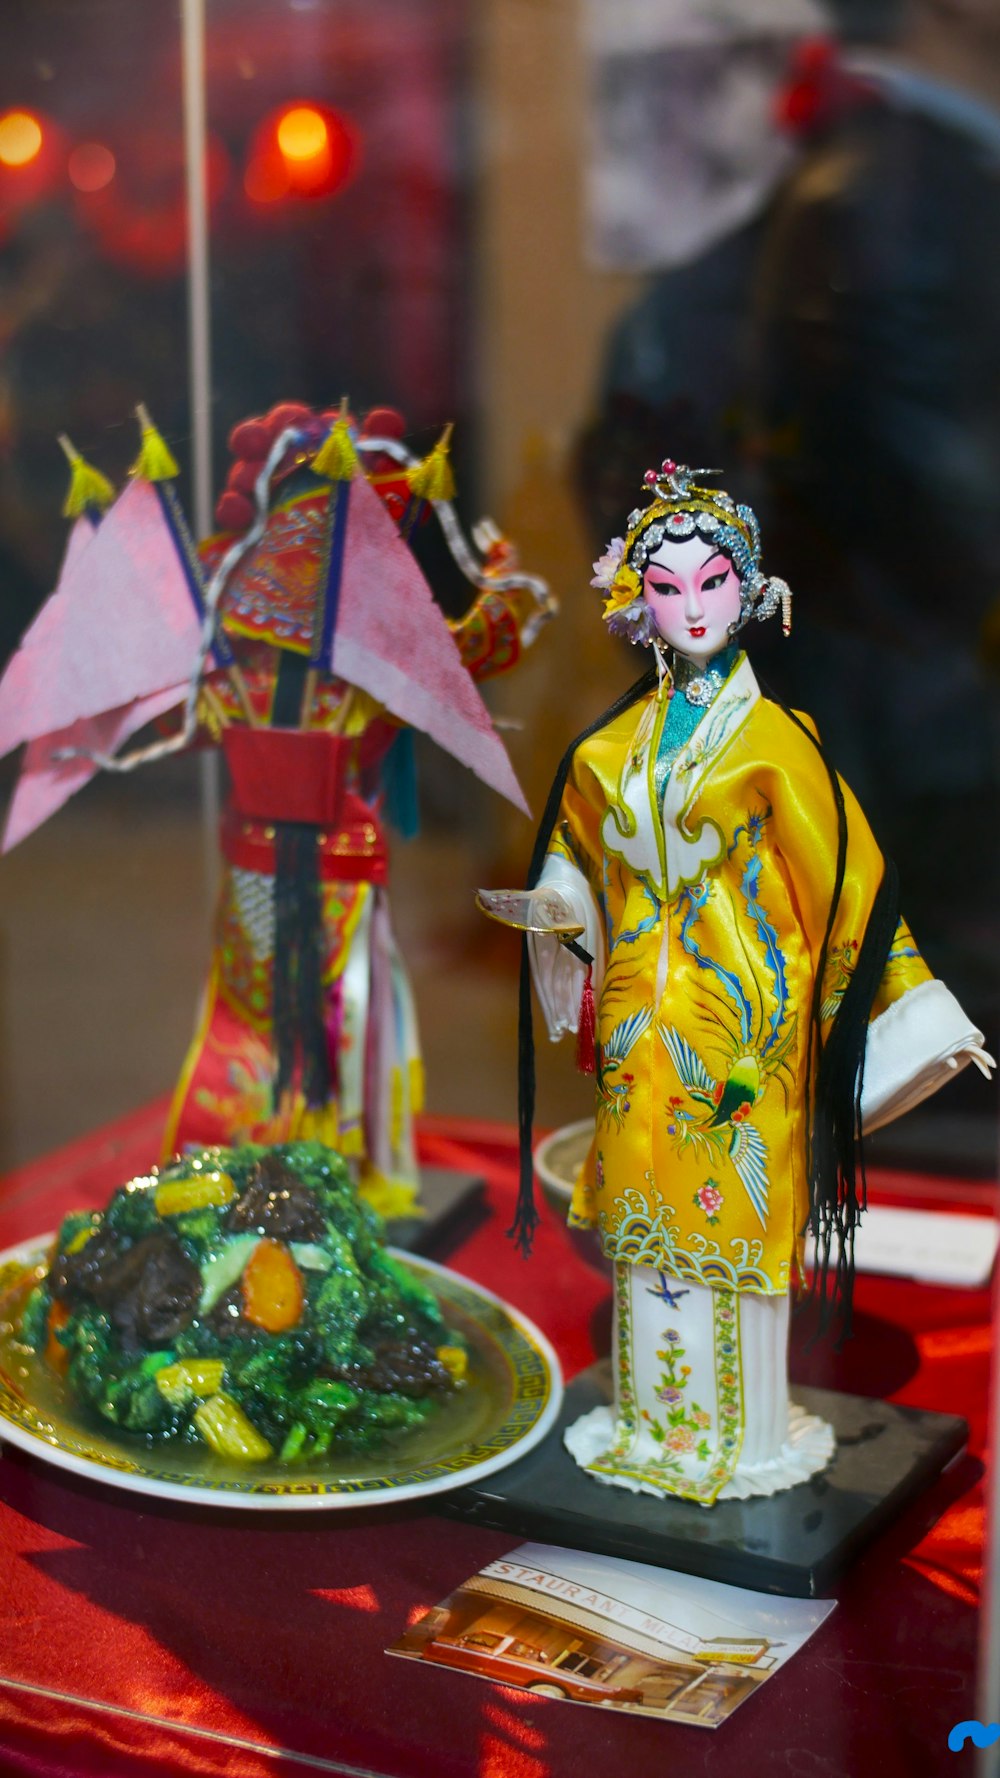 a statue of a woman in a kimono next to a plate of food